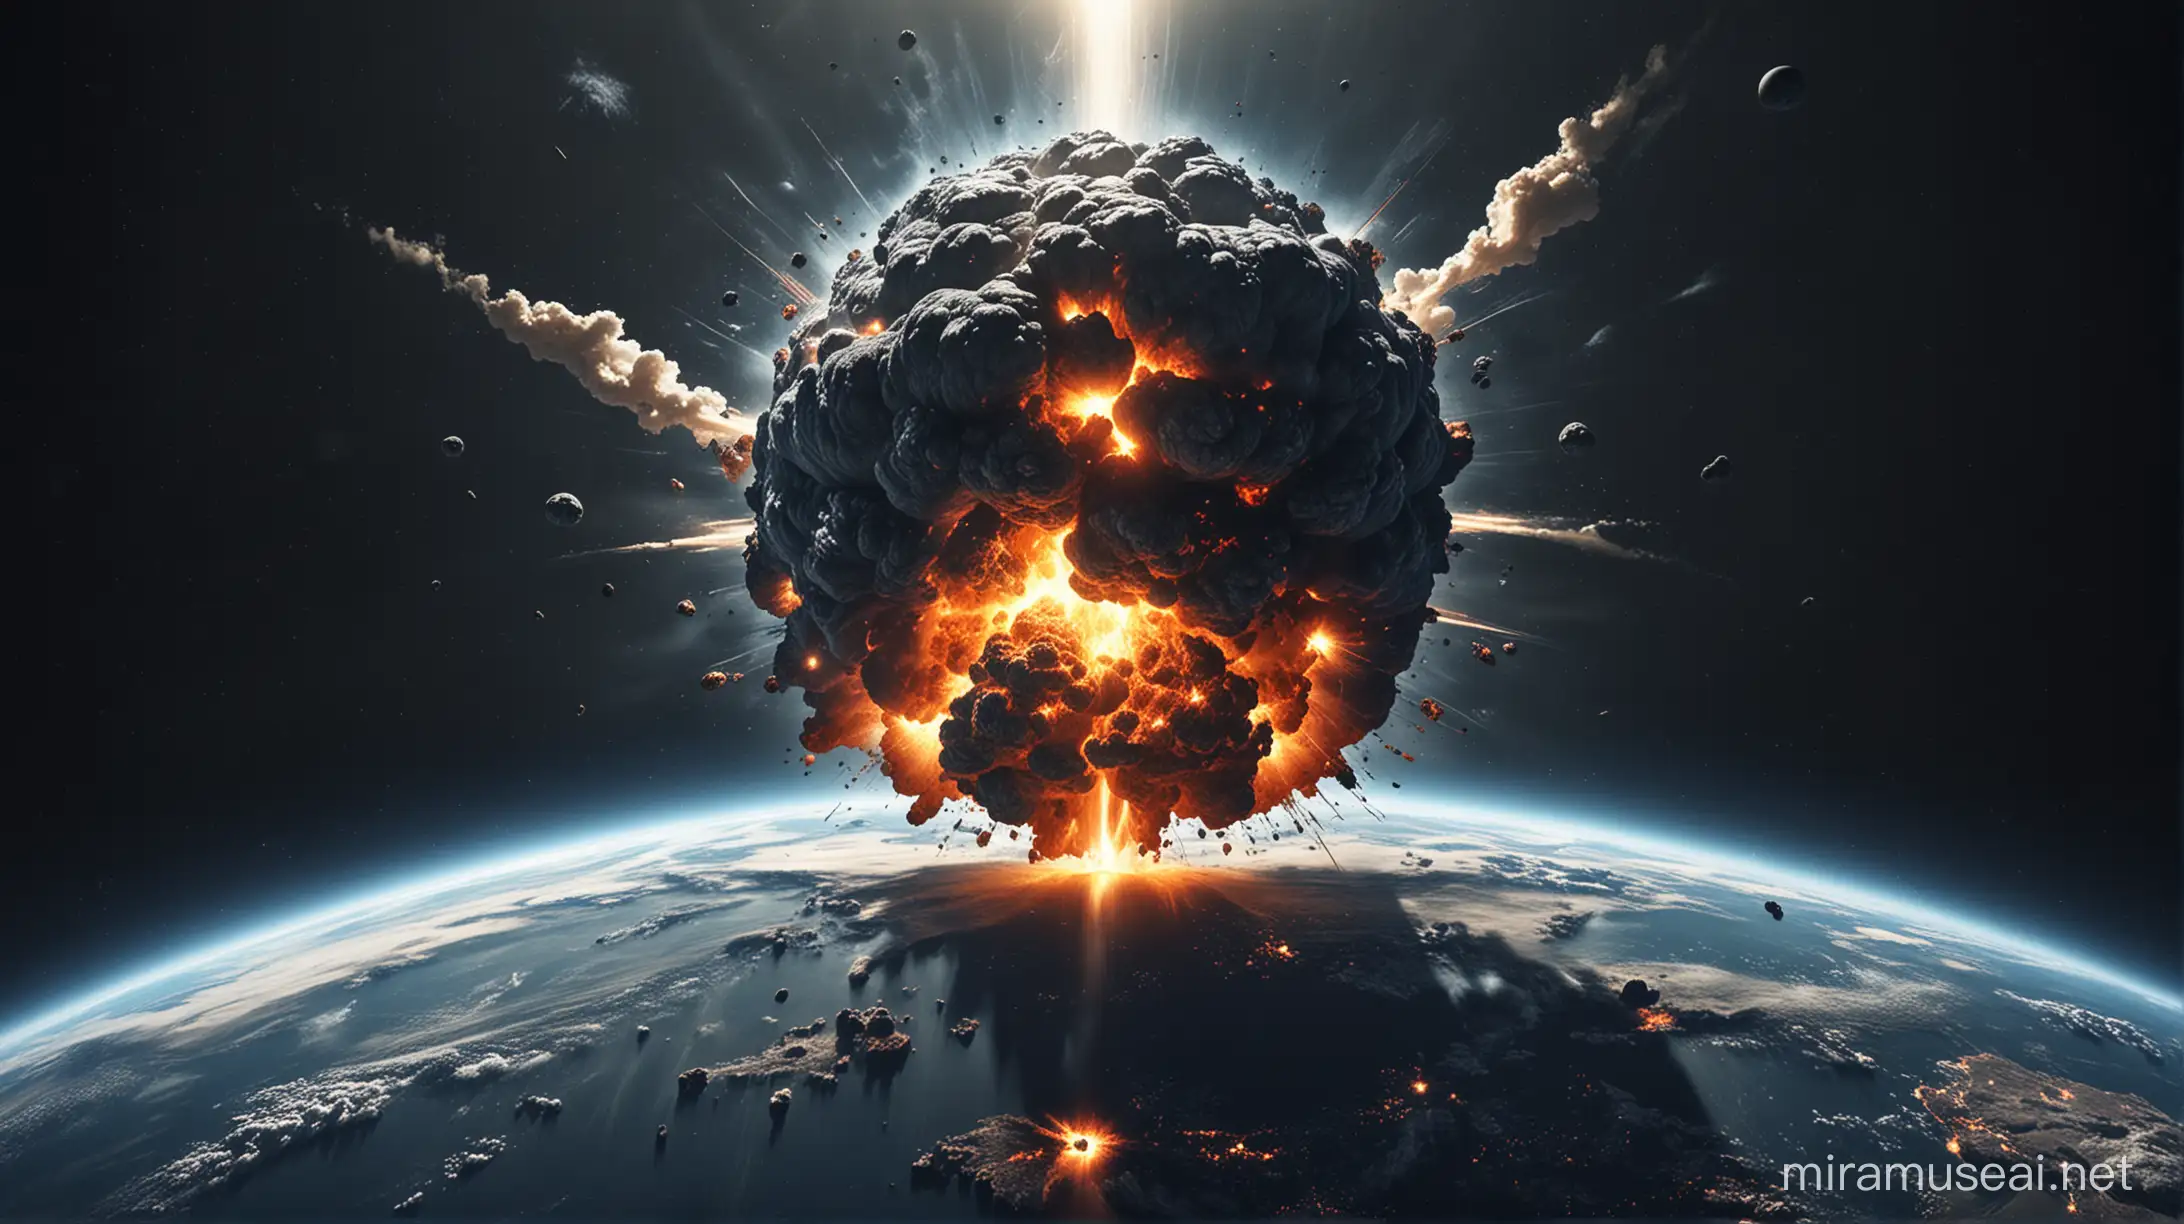 realistic image of the earth seen from space, with a dark appearance and the explosion of an atomic bomb symbolizing the self-destruction of the earth